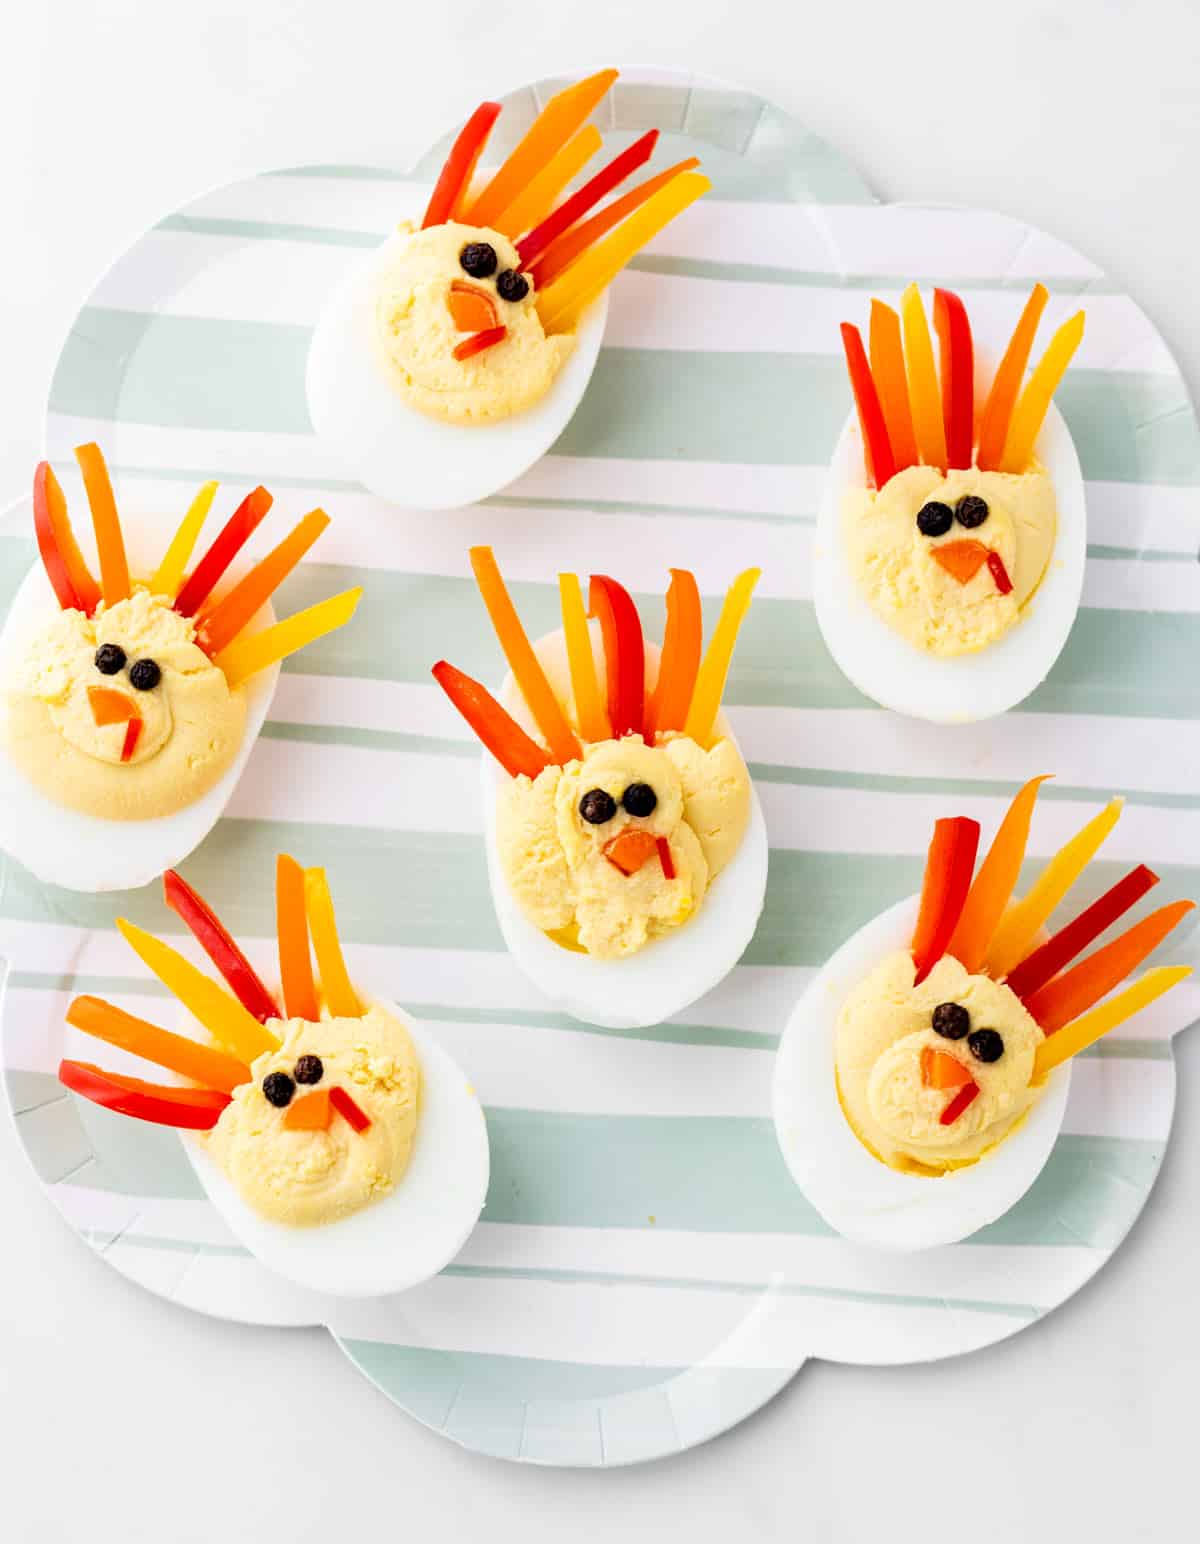 Overhead image of turkey deviled eggs on a striped plate.